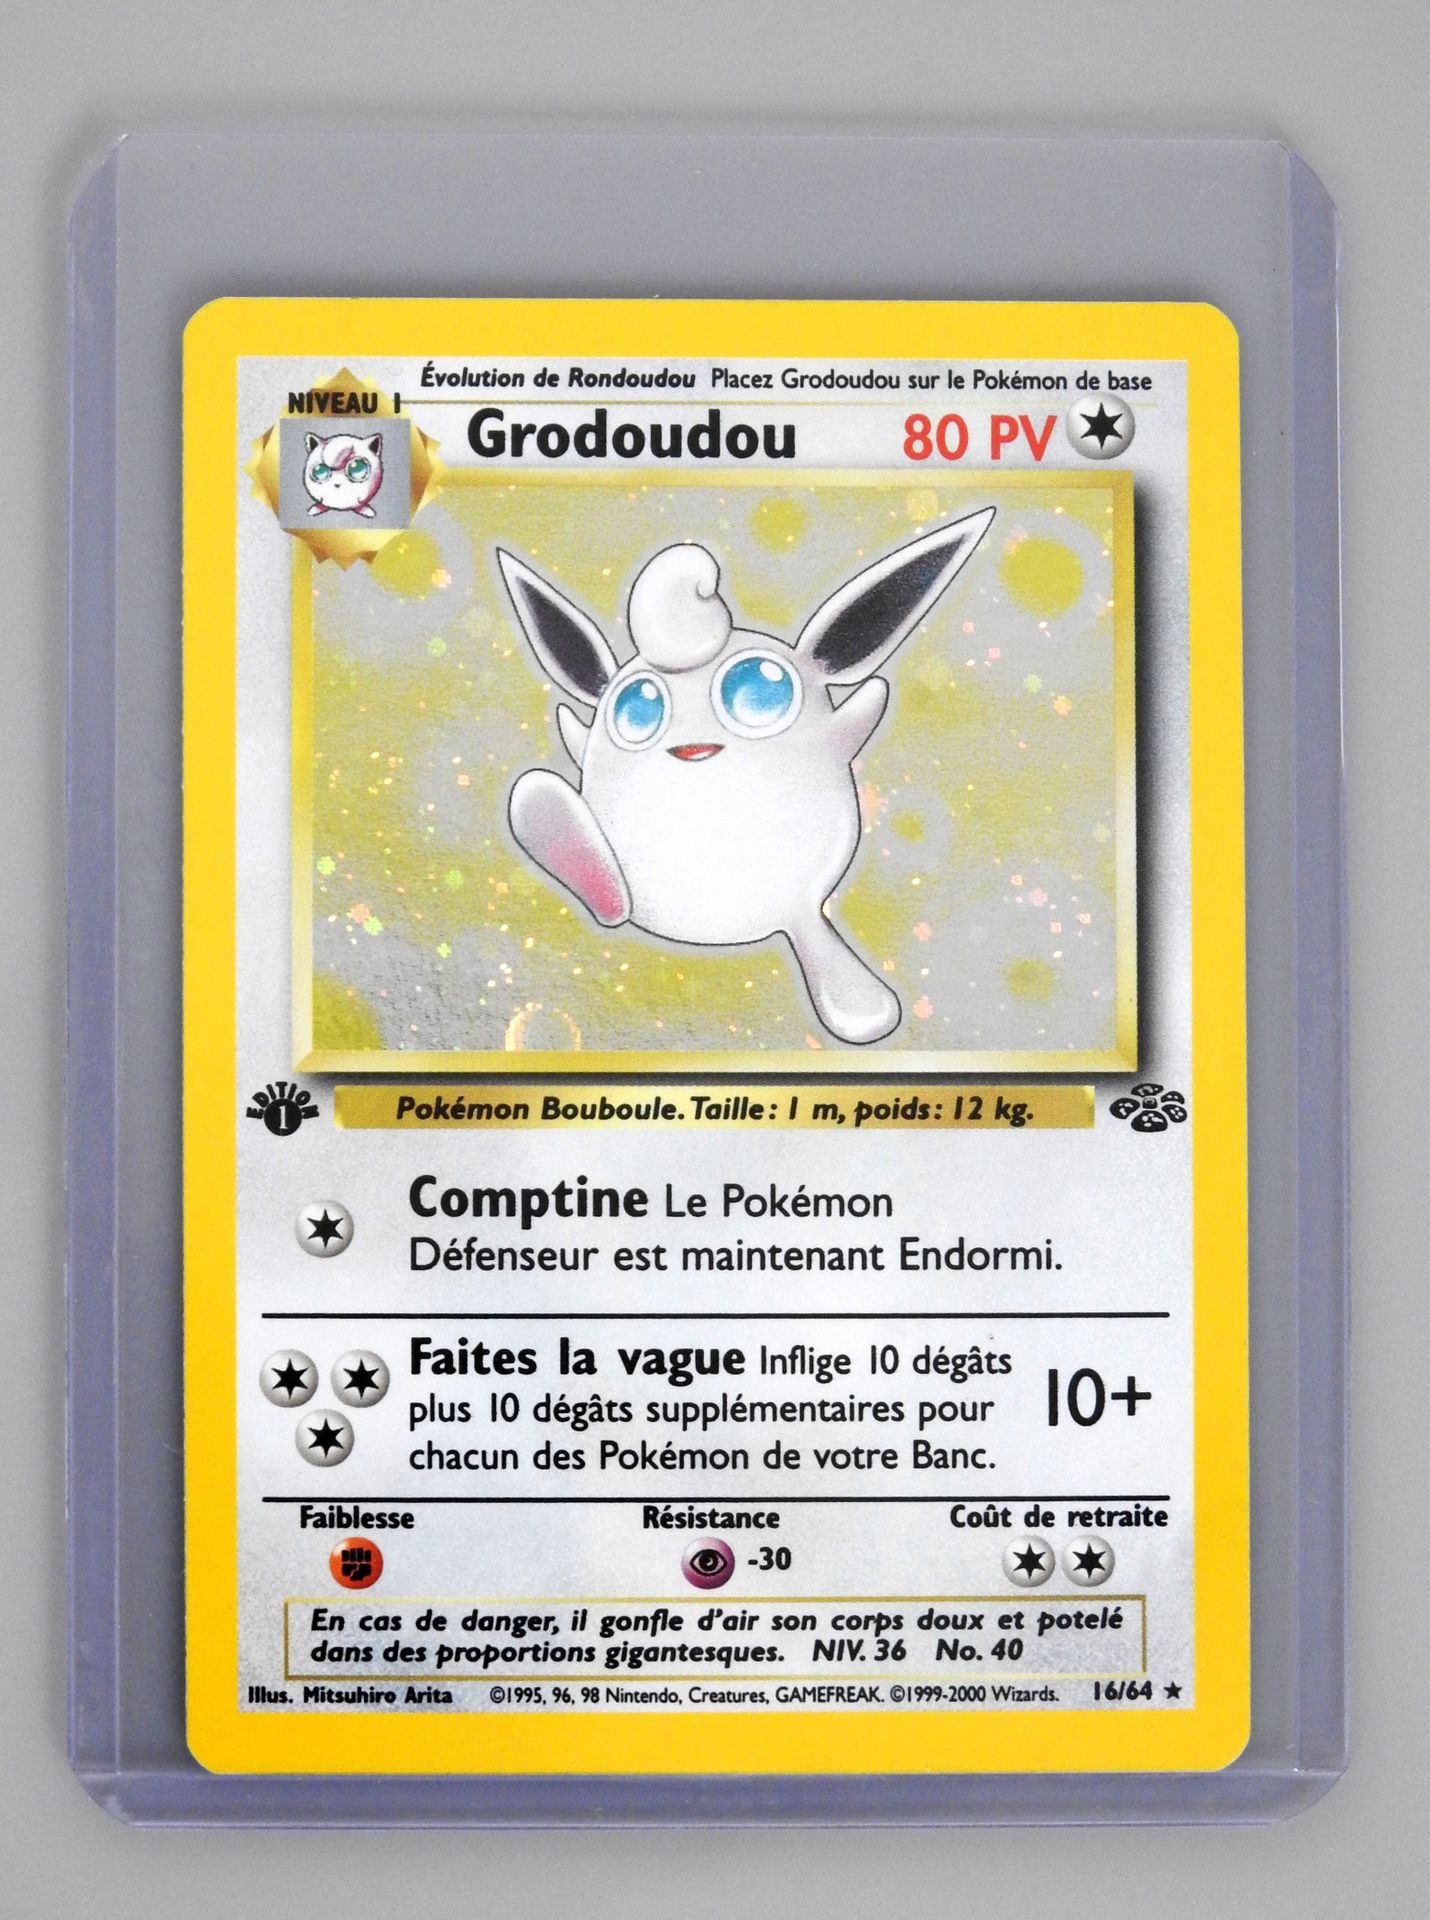 Null GRODOUDOU Ed 1

Wizards Jungle Block 16/64

Pokemon card in great condition